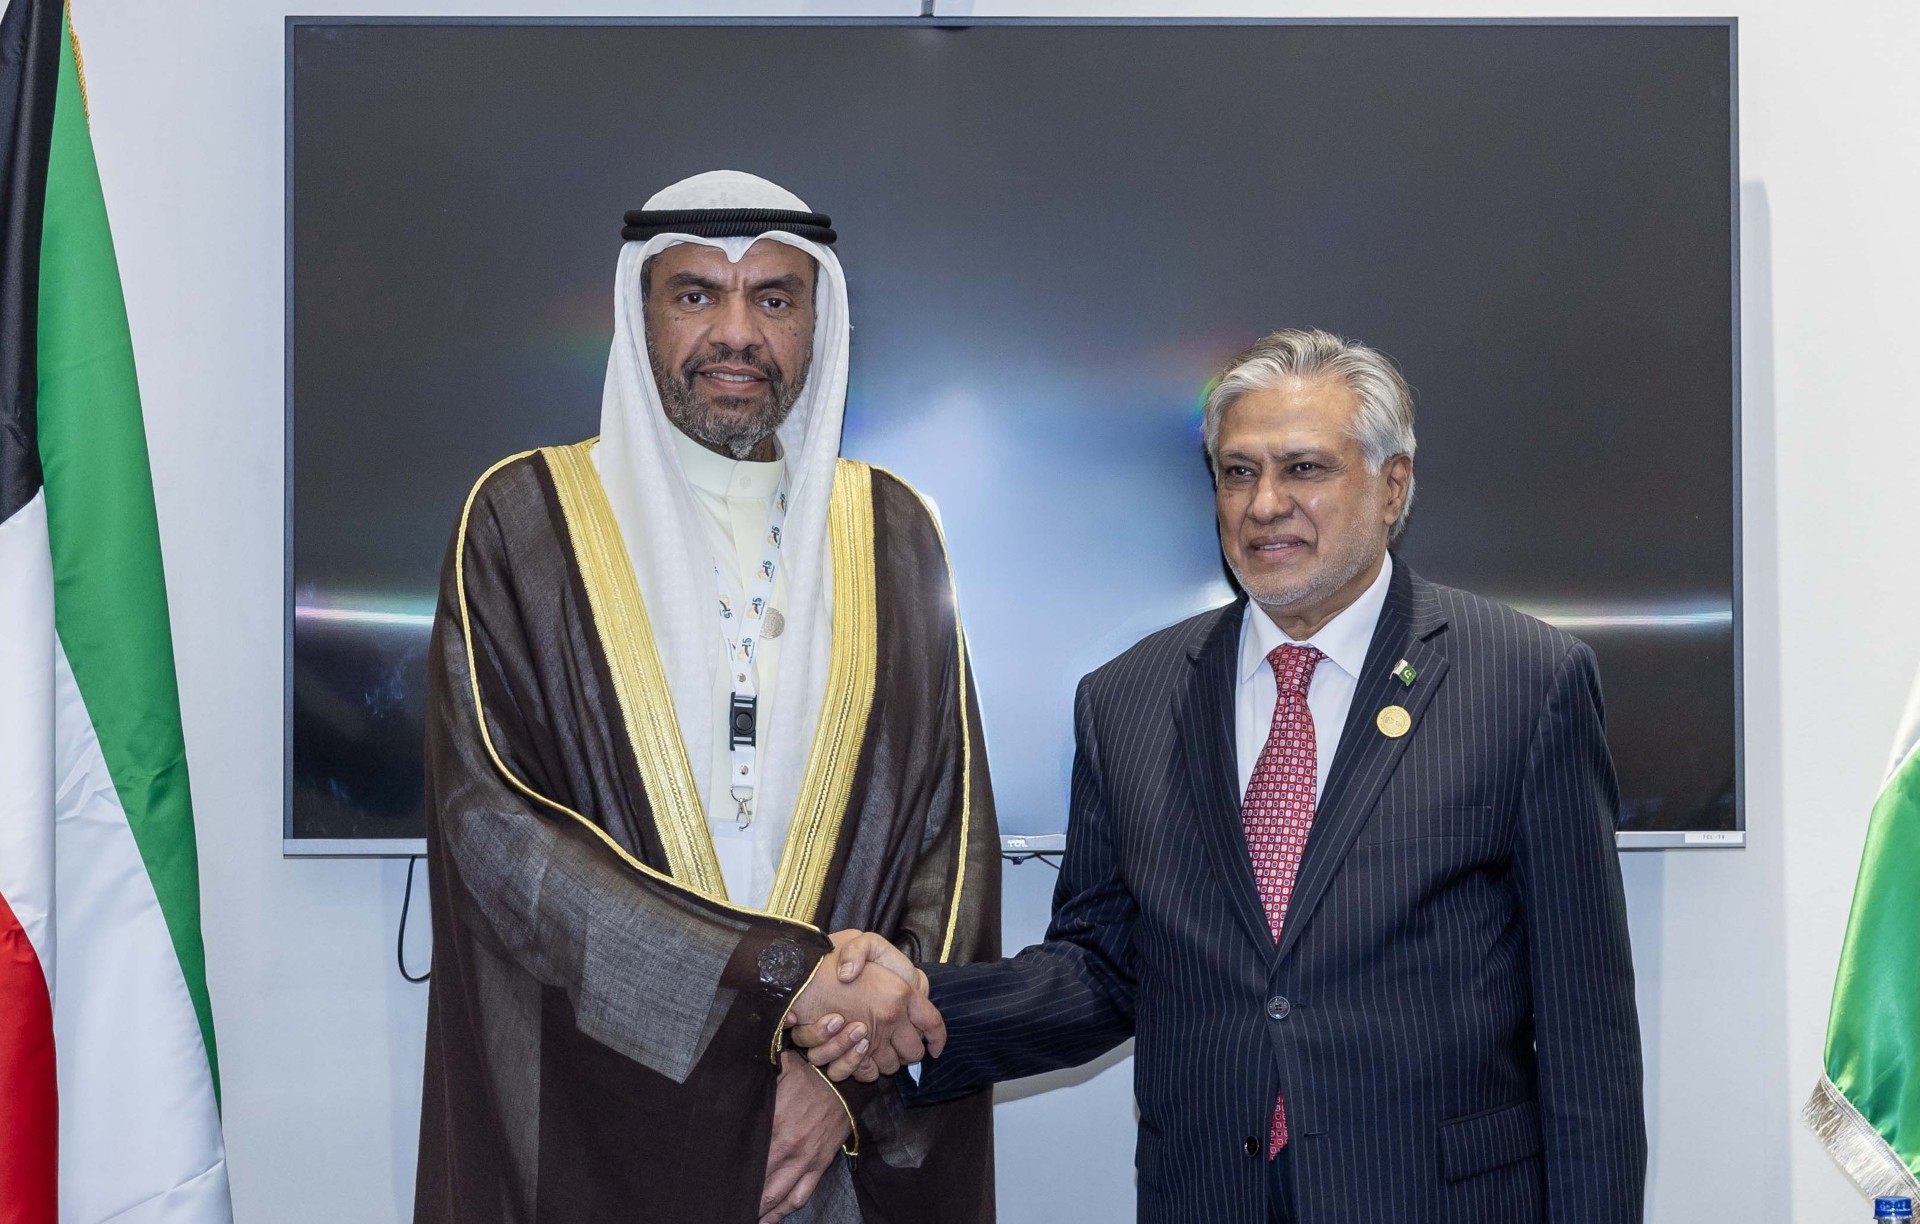 Representative of His Highness the Amir, the Foreign Minister meets Deputy Prime Minister and Foreign Minister of Pakistan Mohammad Ishaq Dar on the sidelines of the OIC Summit